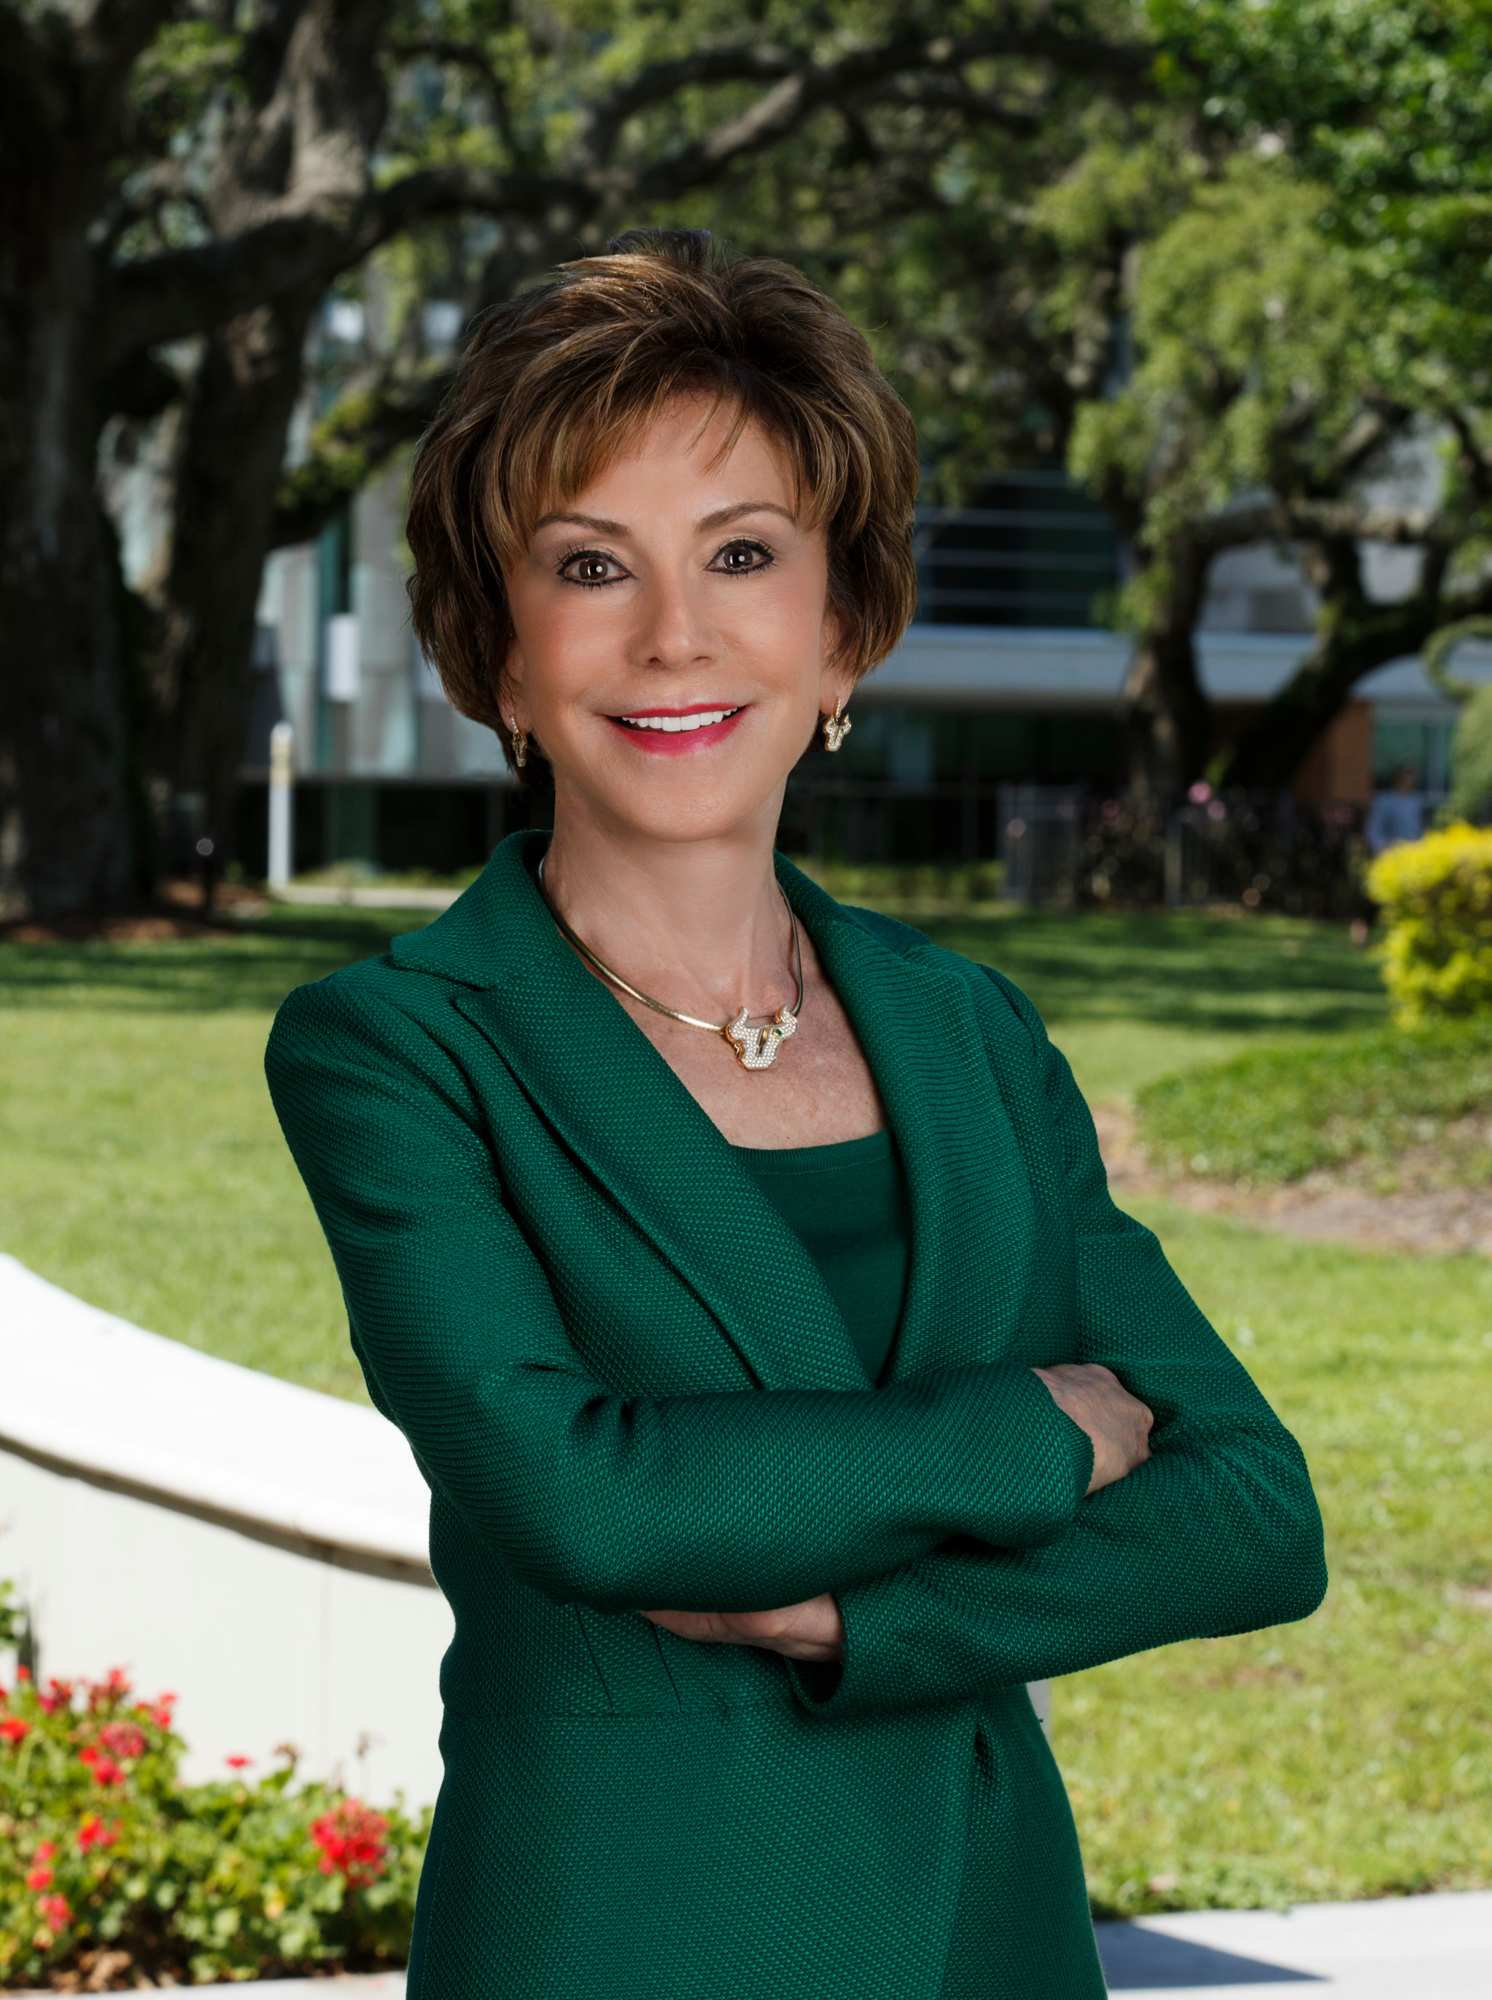 USF System President Judy Genshaft is set to retire in July after leading the university for 19 years. Courtesy photo.